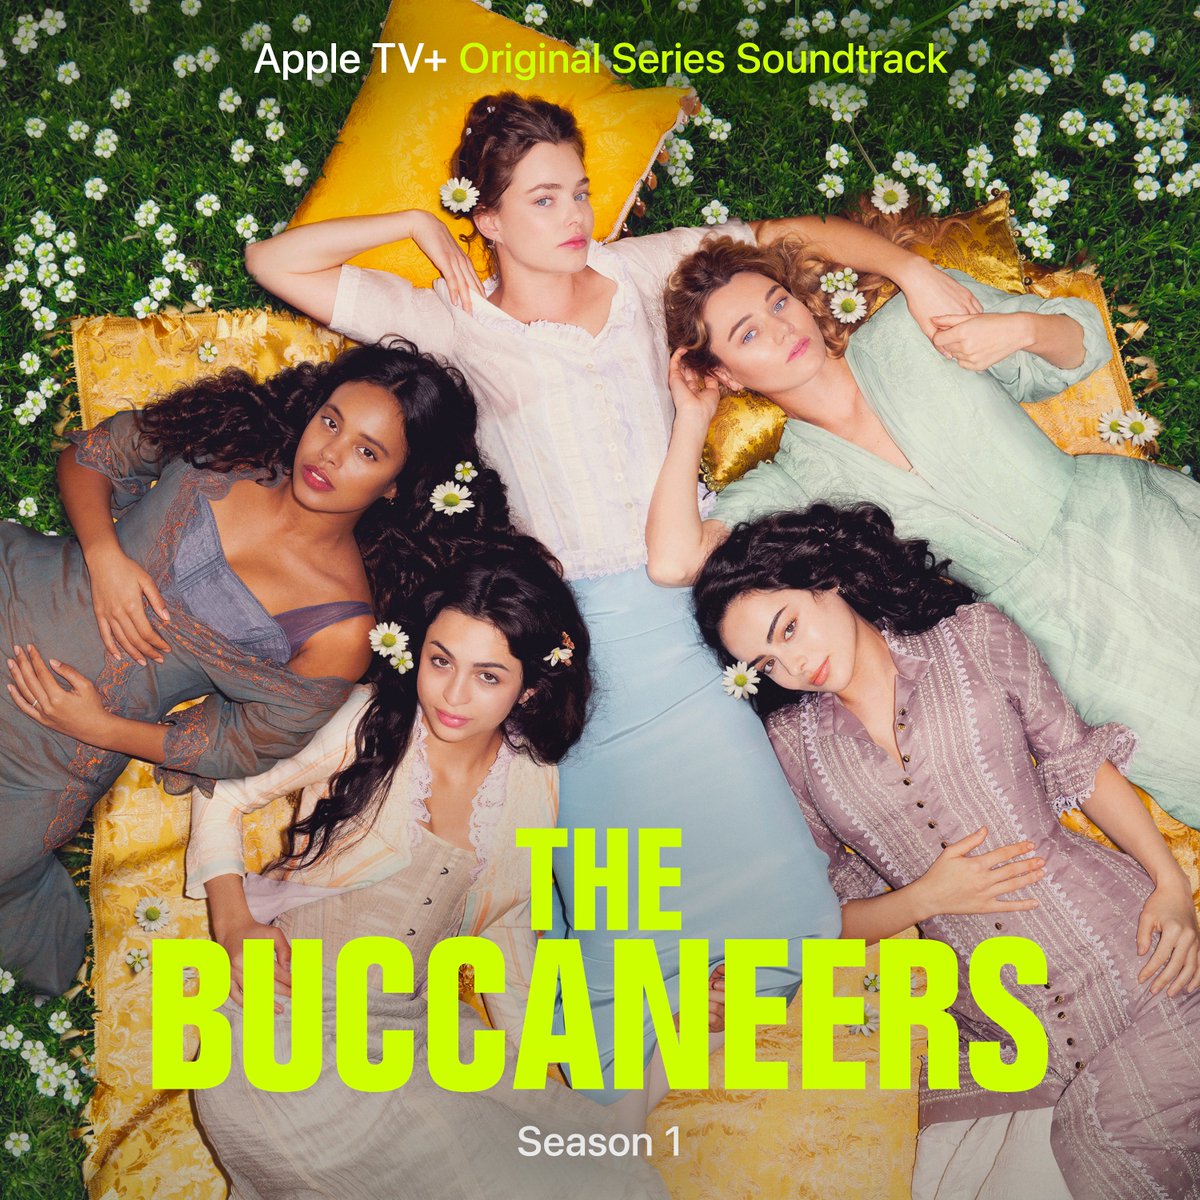 Streaming today on @AppleTV, The Buccaneers is a new drama scored by @AVAWAVESMUSIC and includes music by @sarah_walk ✨